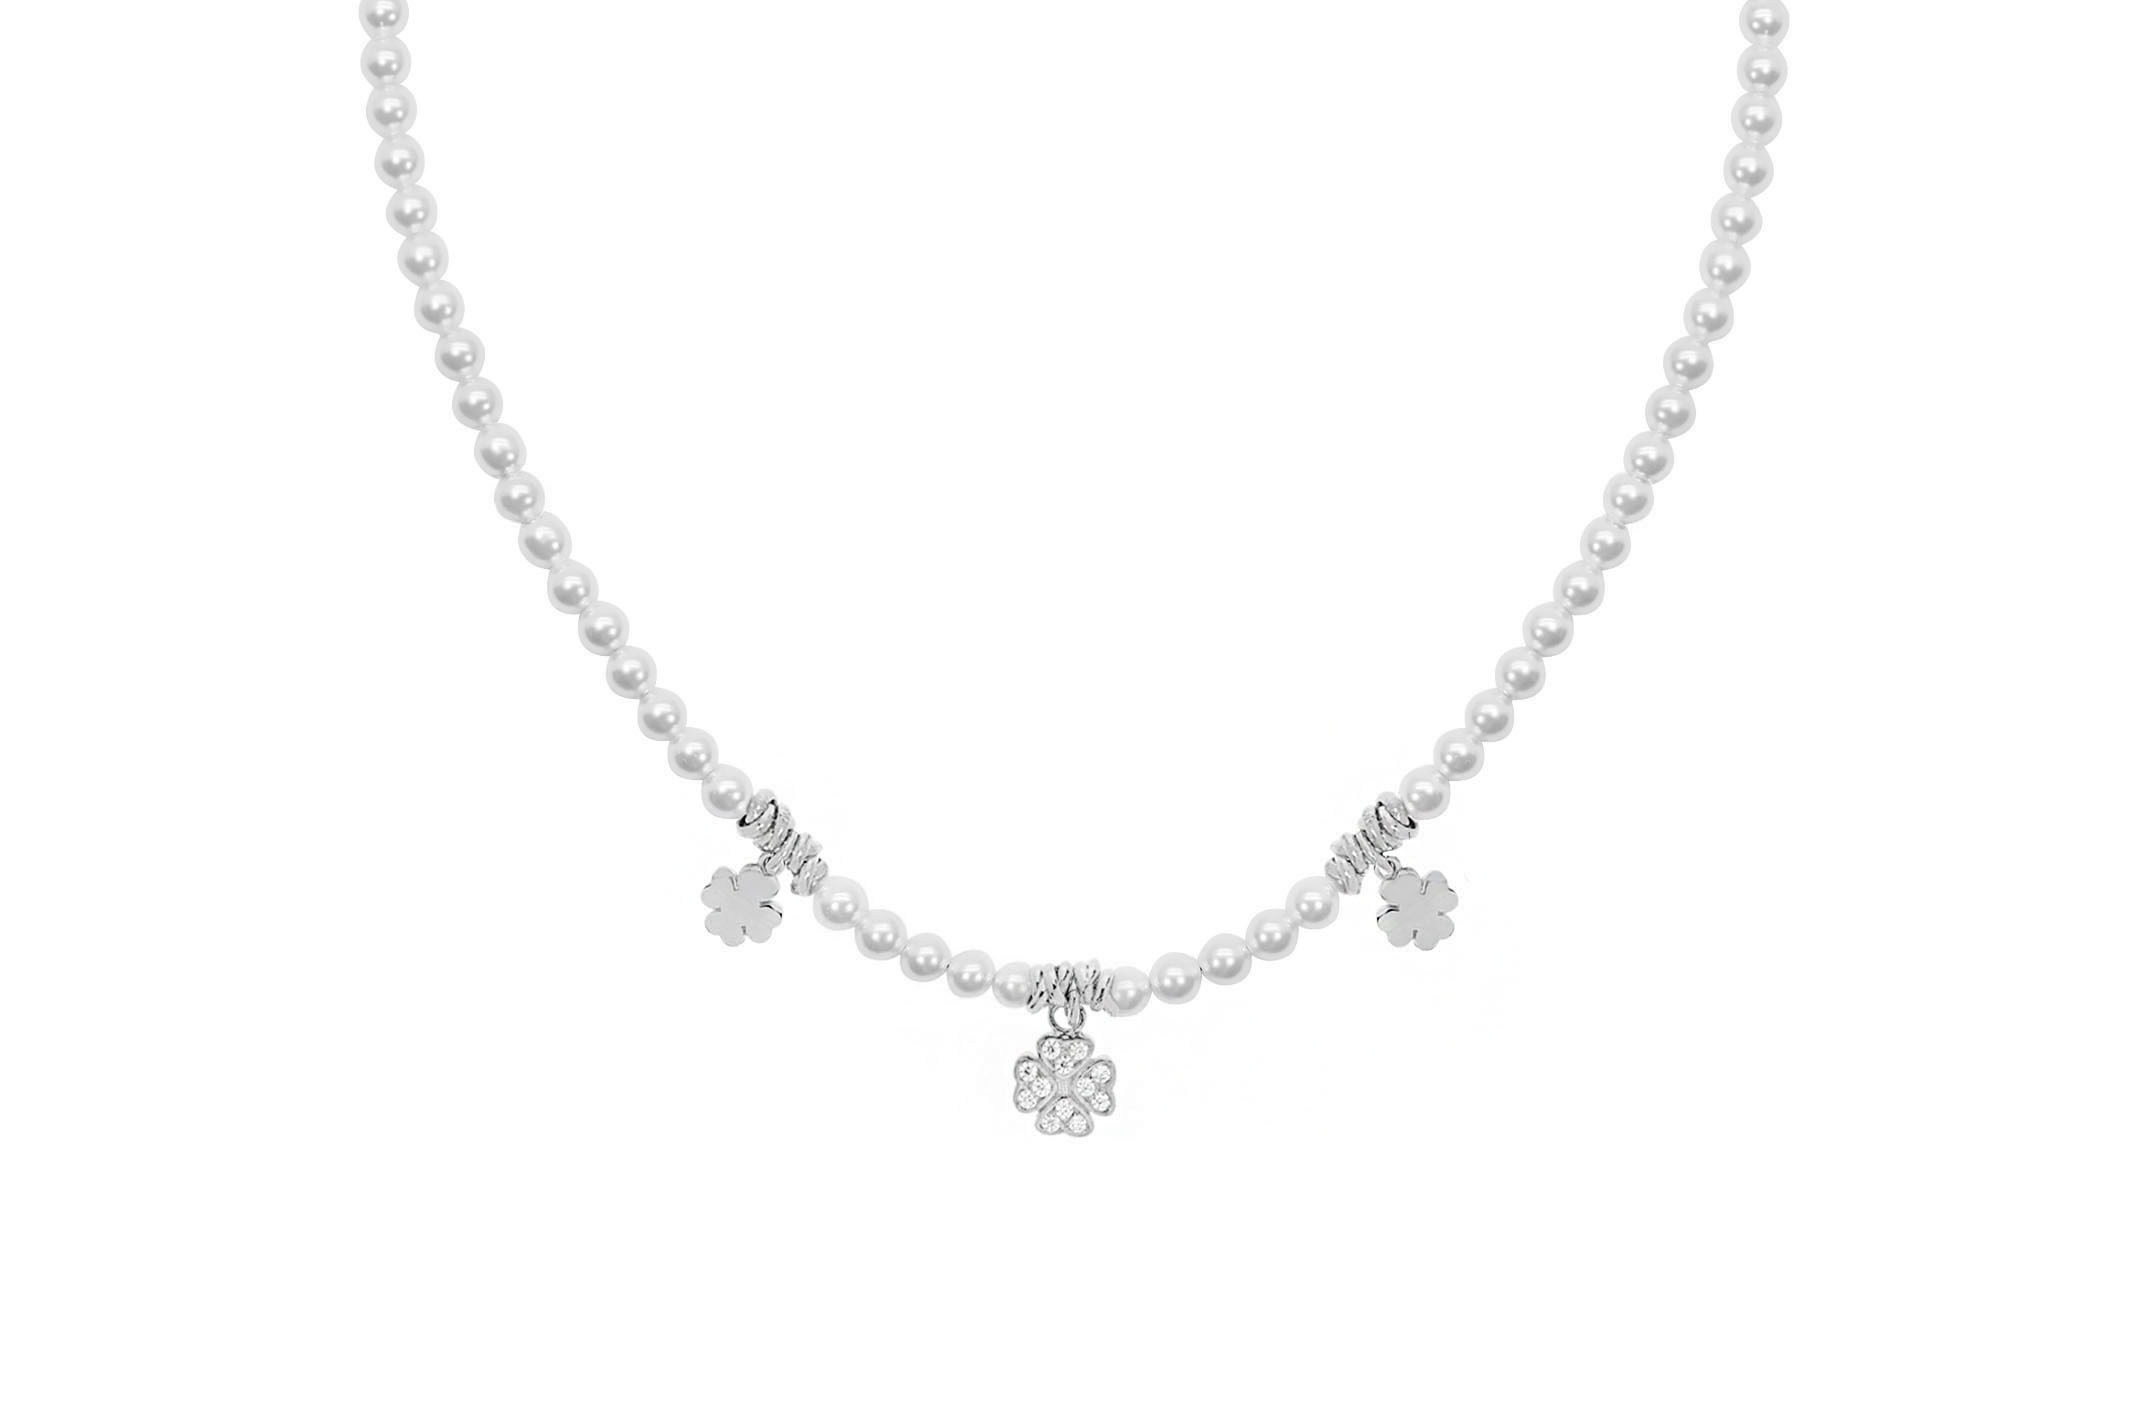 Jewel: necklace;Material: silver 925;Weight: 21.4 gr;Stone: pearl & zirconia;Color: white;Size: 40 cm + 4 cm;Pendent size: 0.5 cm